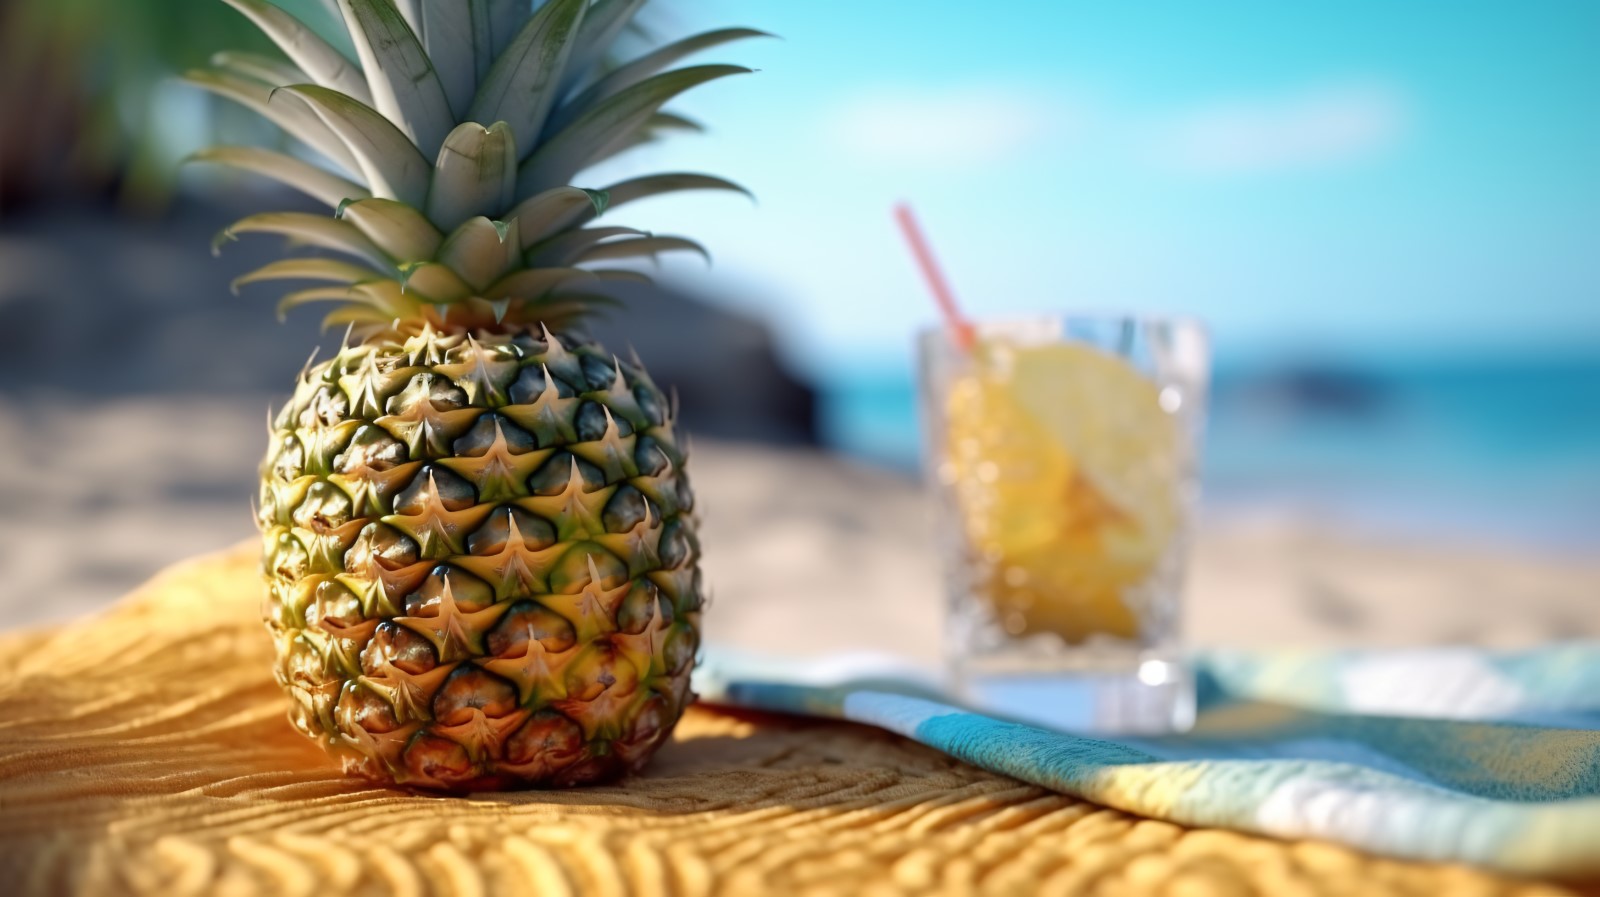 Pineapple drink in cocktail glass and sand beach scene 415